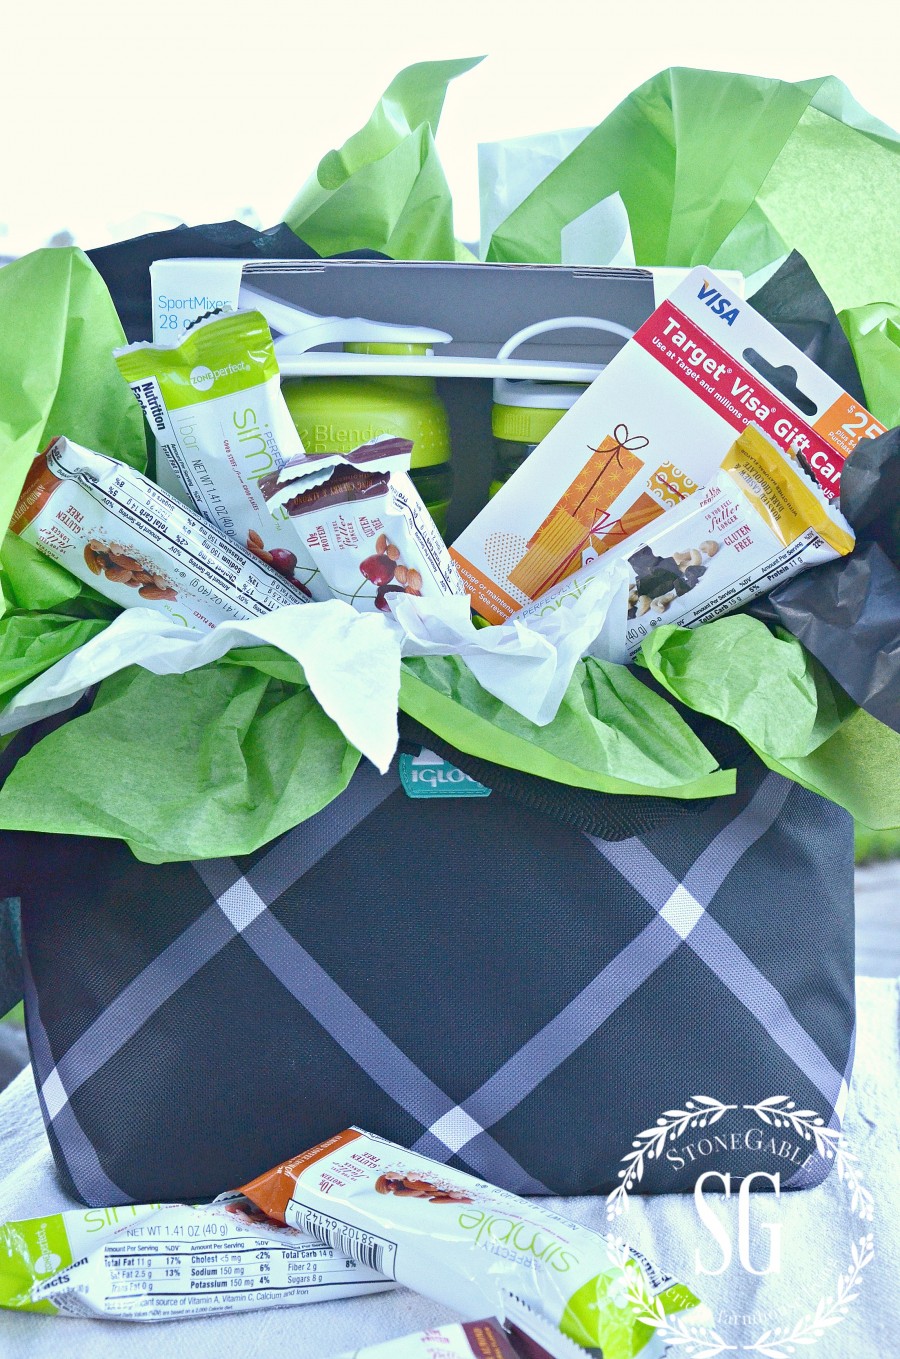 ON THE GO HEALTHY GIVEAWAY! $100.00 VALUE